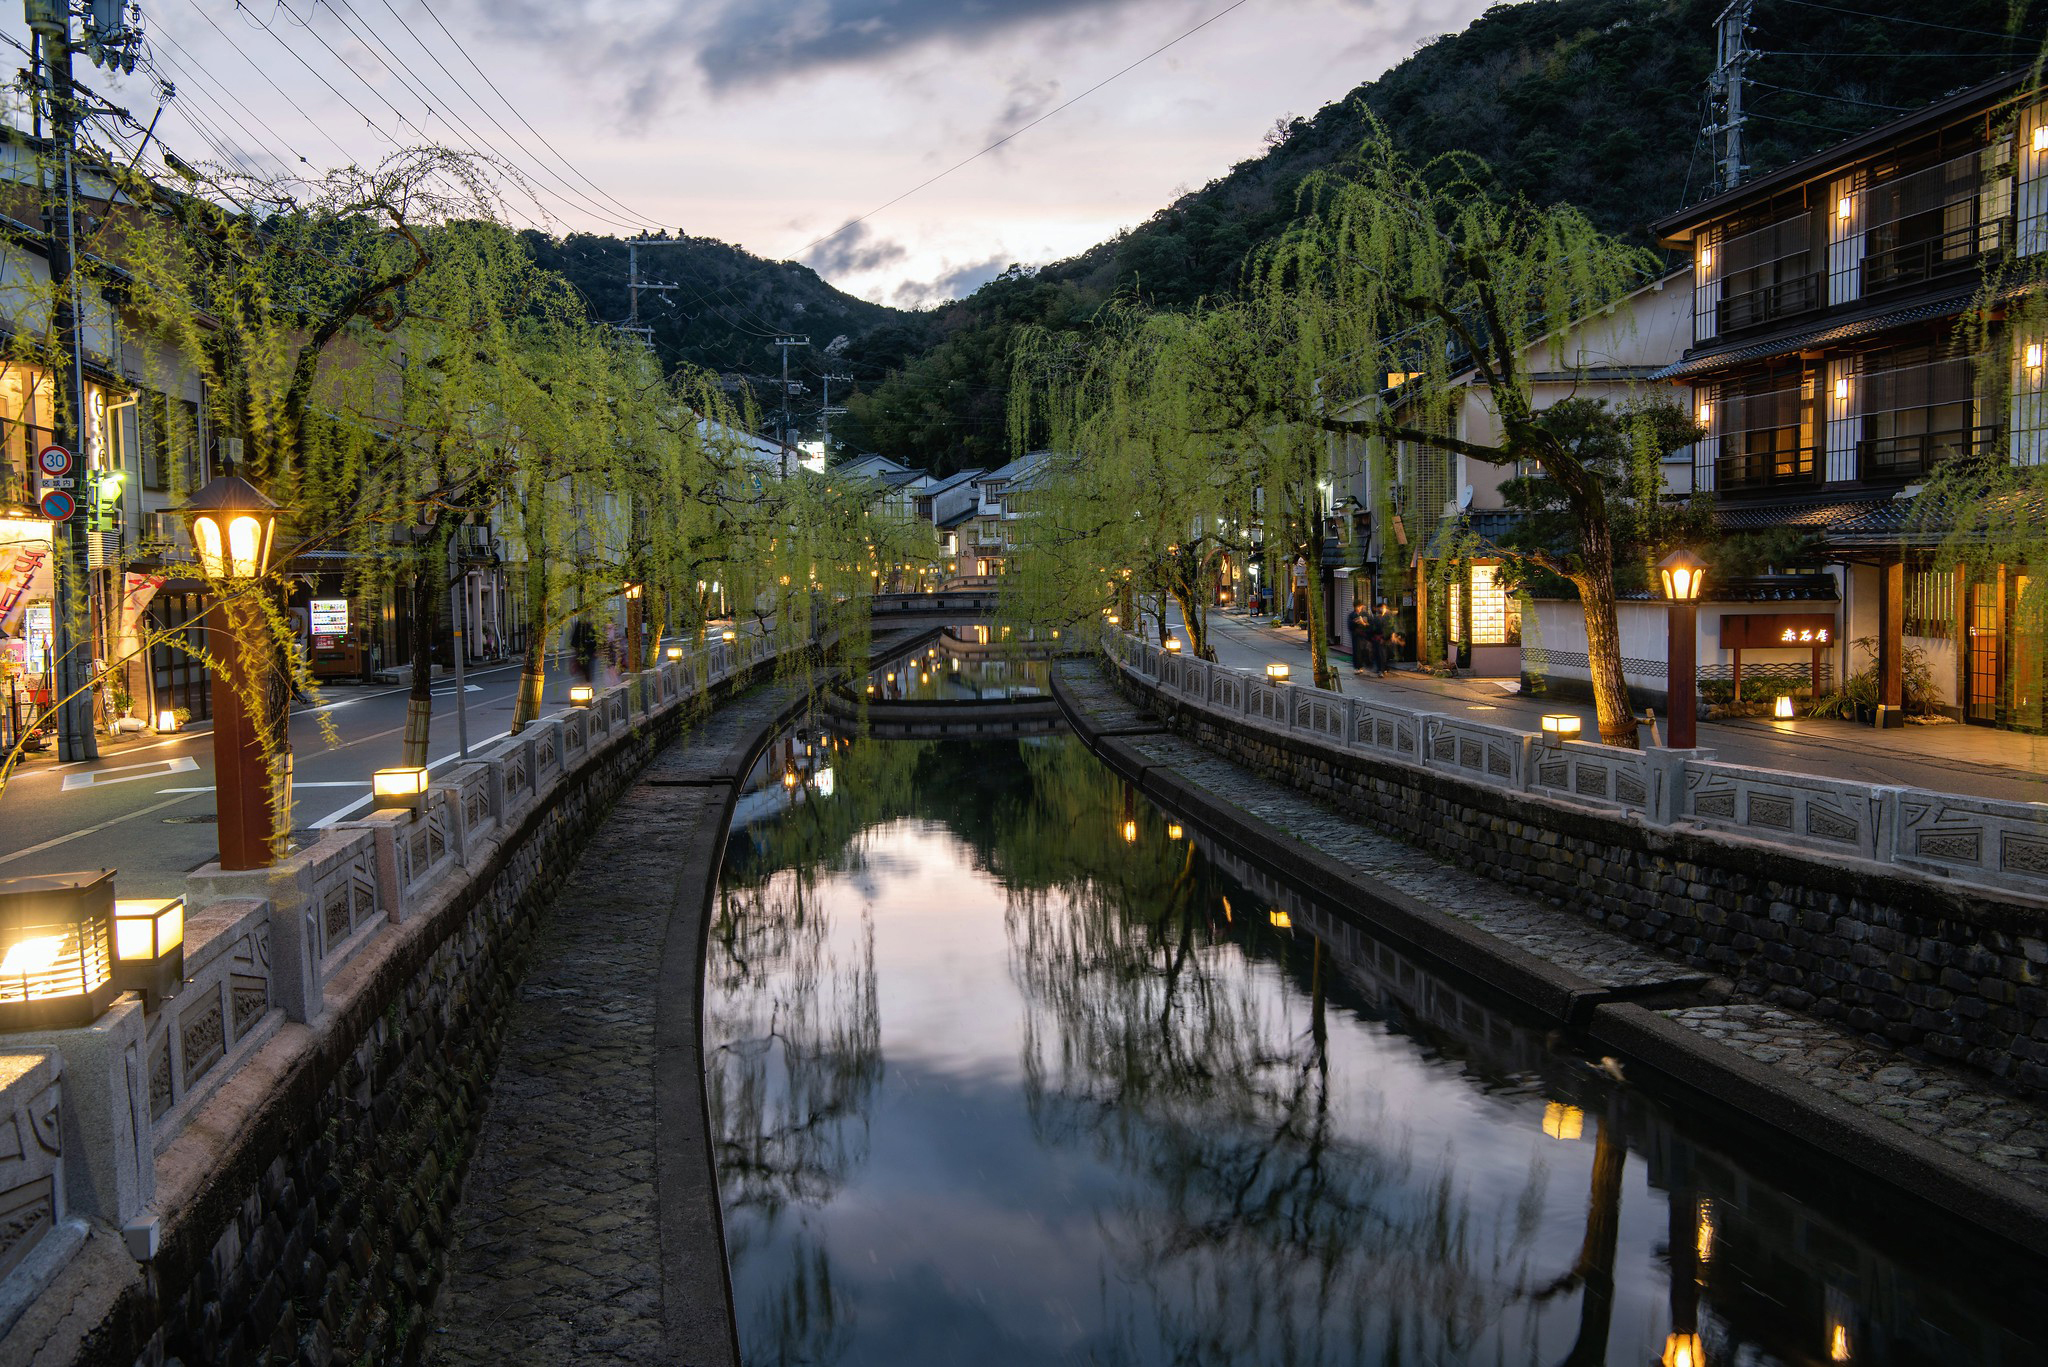 evening walk over the stone bridges in Kinosaki along the canal lined with weeping willows